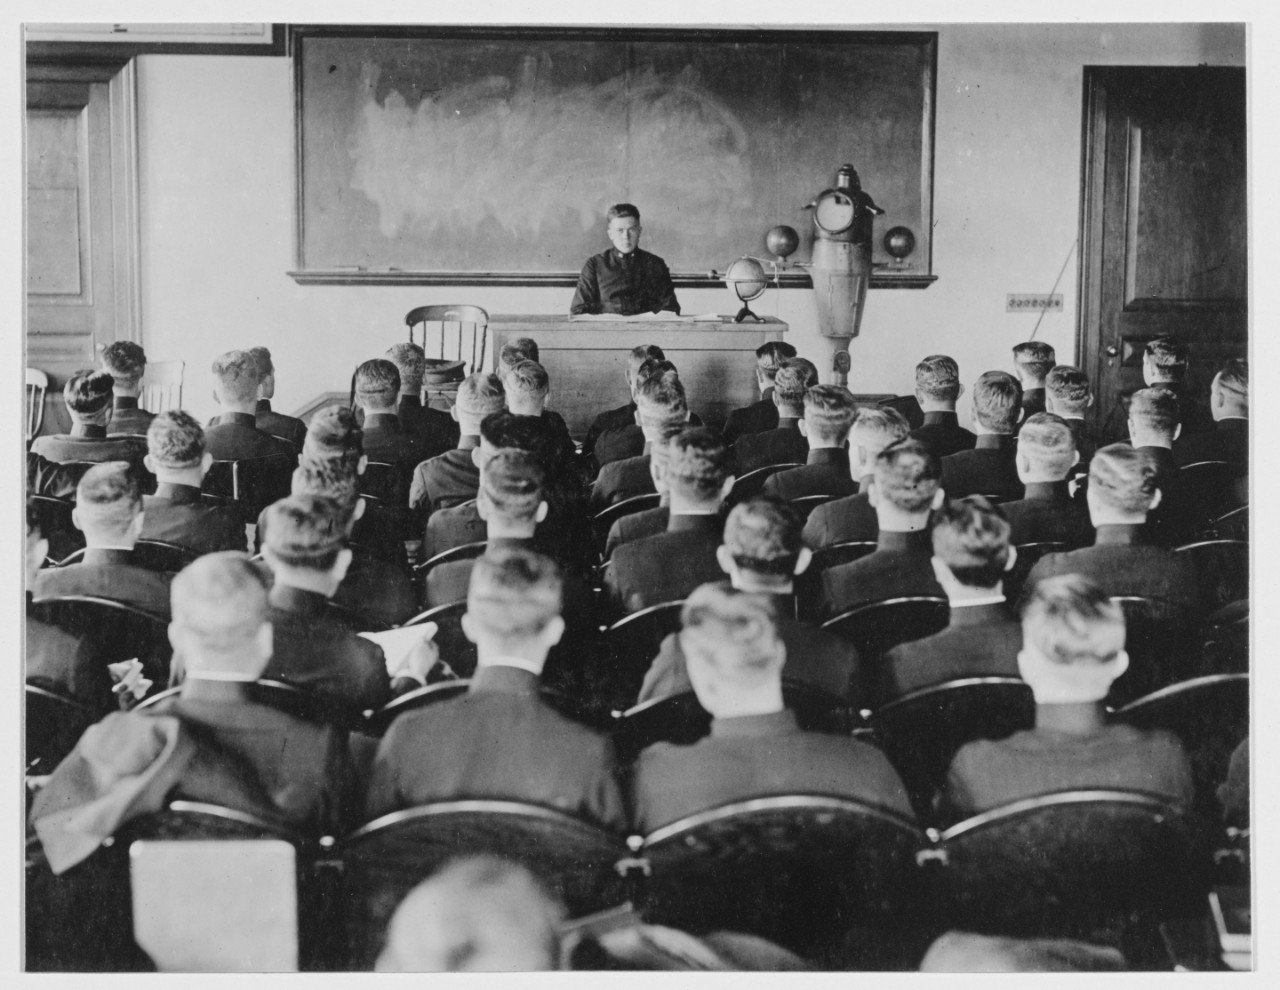 Class room - Emerson Hall Officer Material School, February 6, 1919